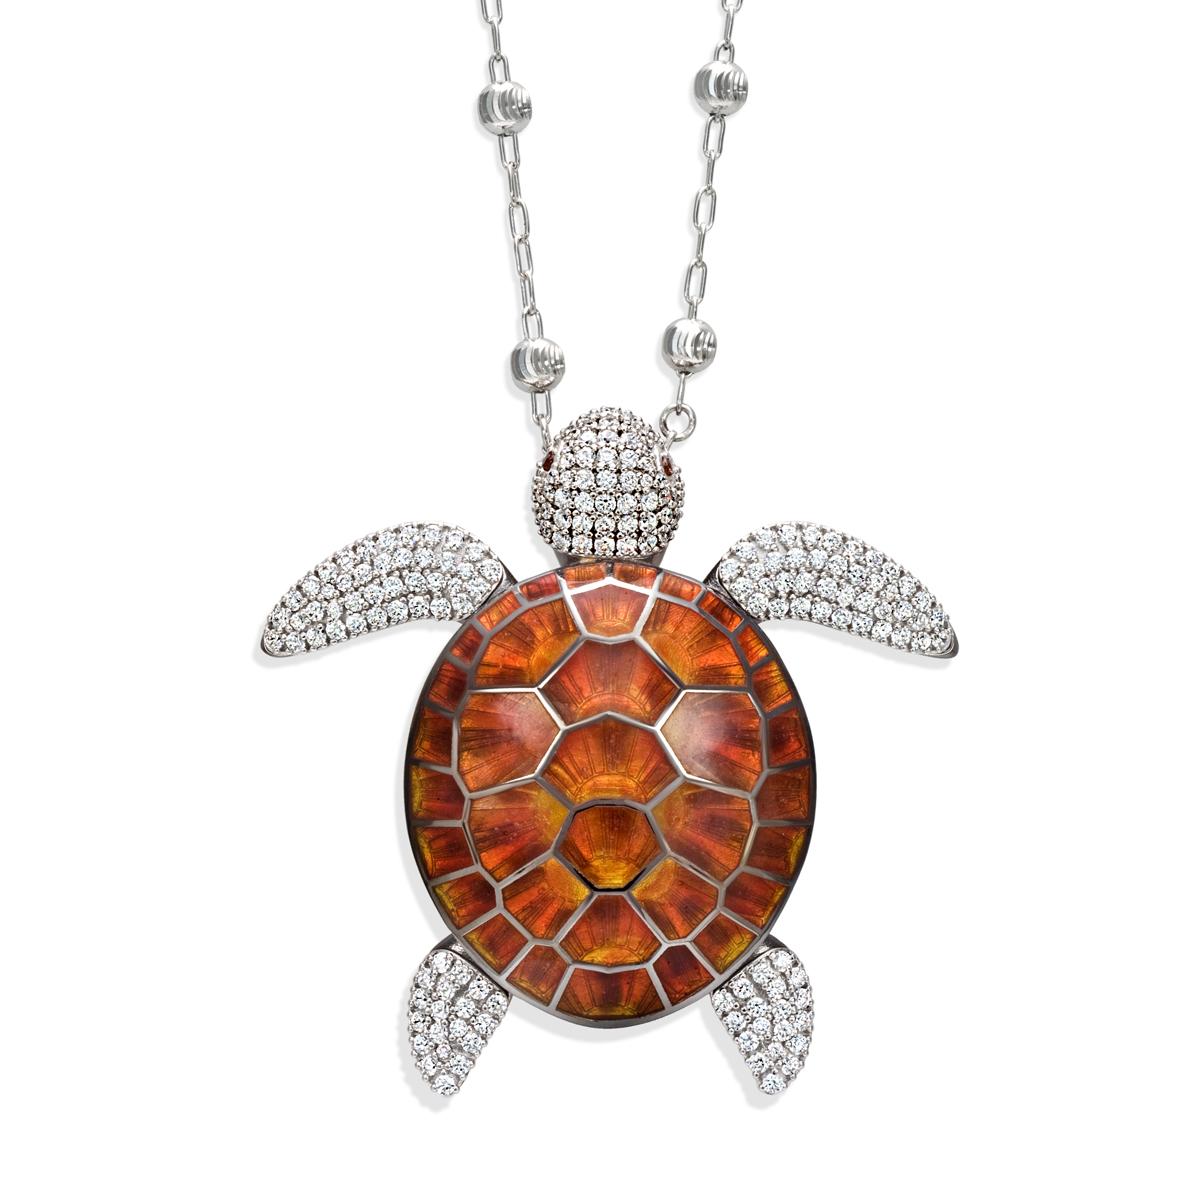 Silver necklace with large enameled turtle pendant